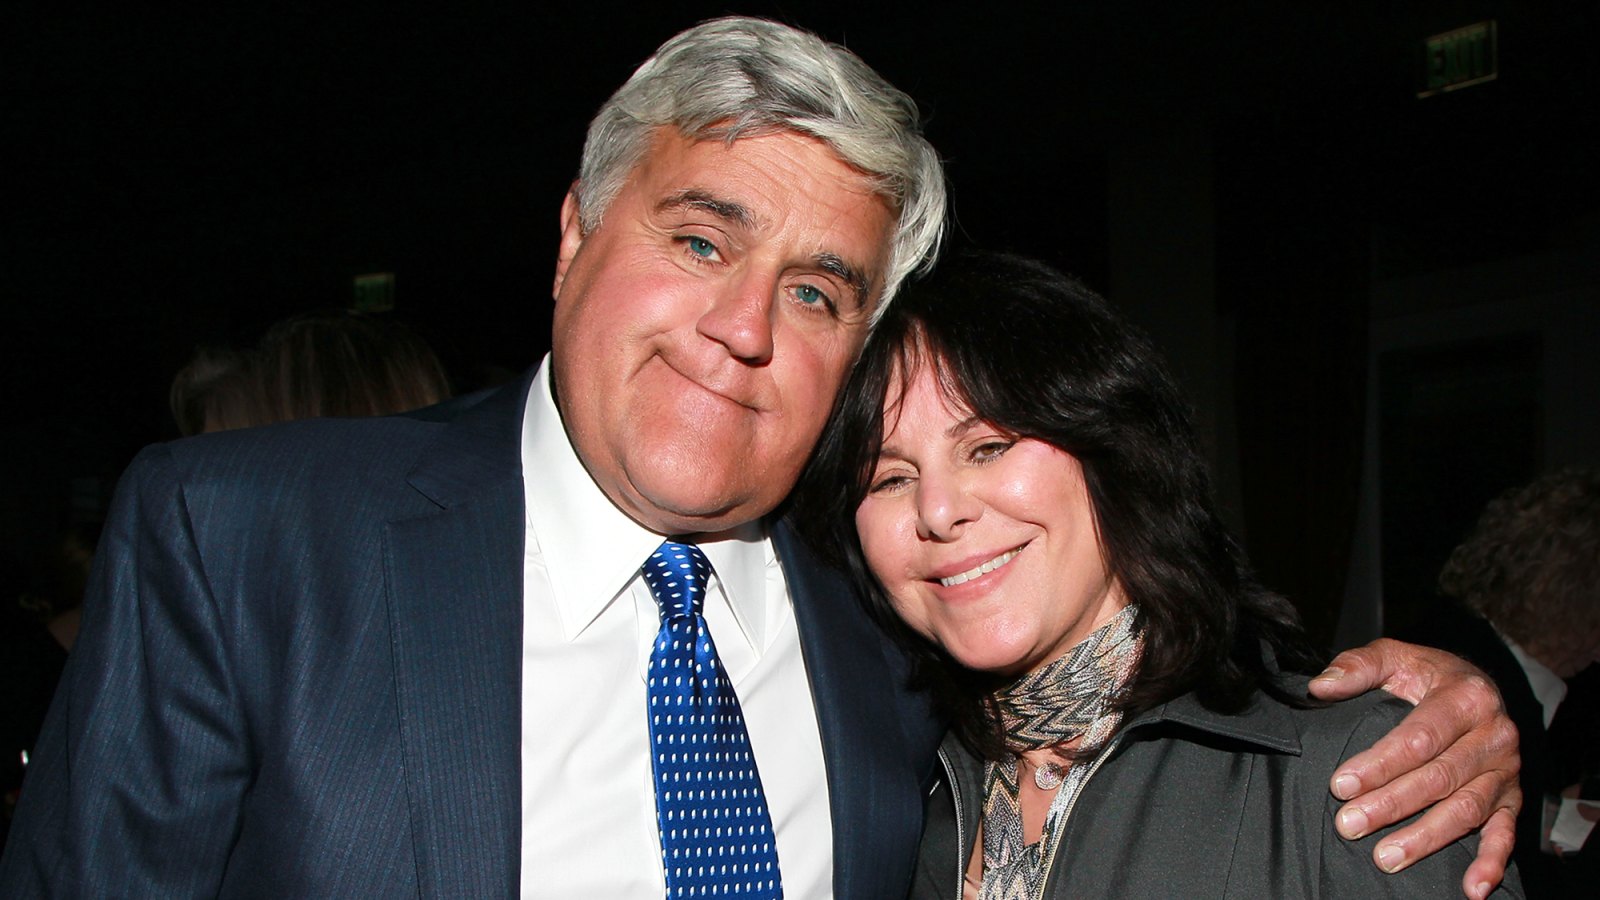 Jay Leno Files for Conservatorship Over Wife Mavis After She Was Diagnosed With Alzheimer’s Disease